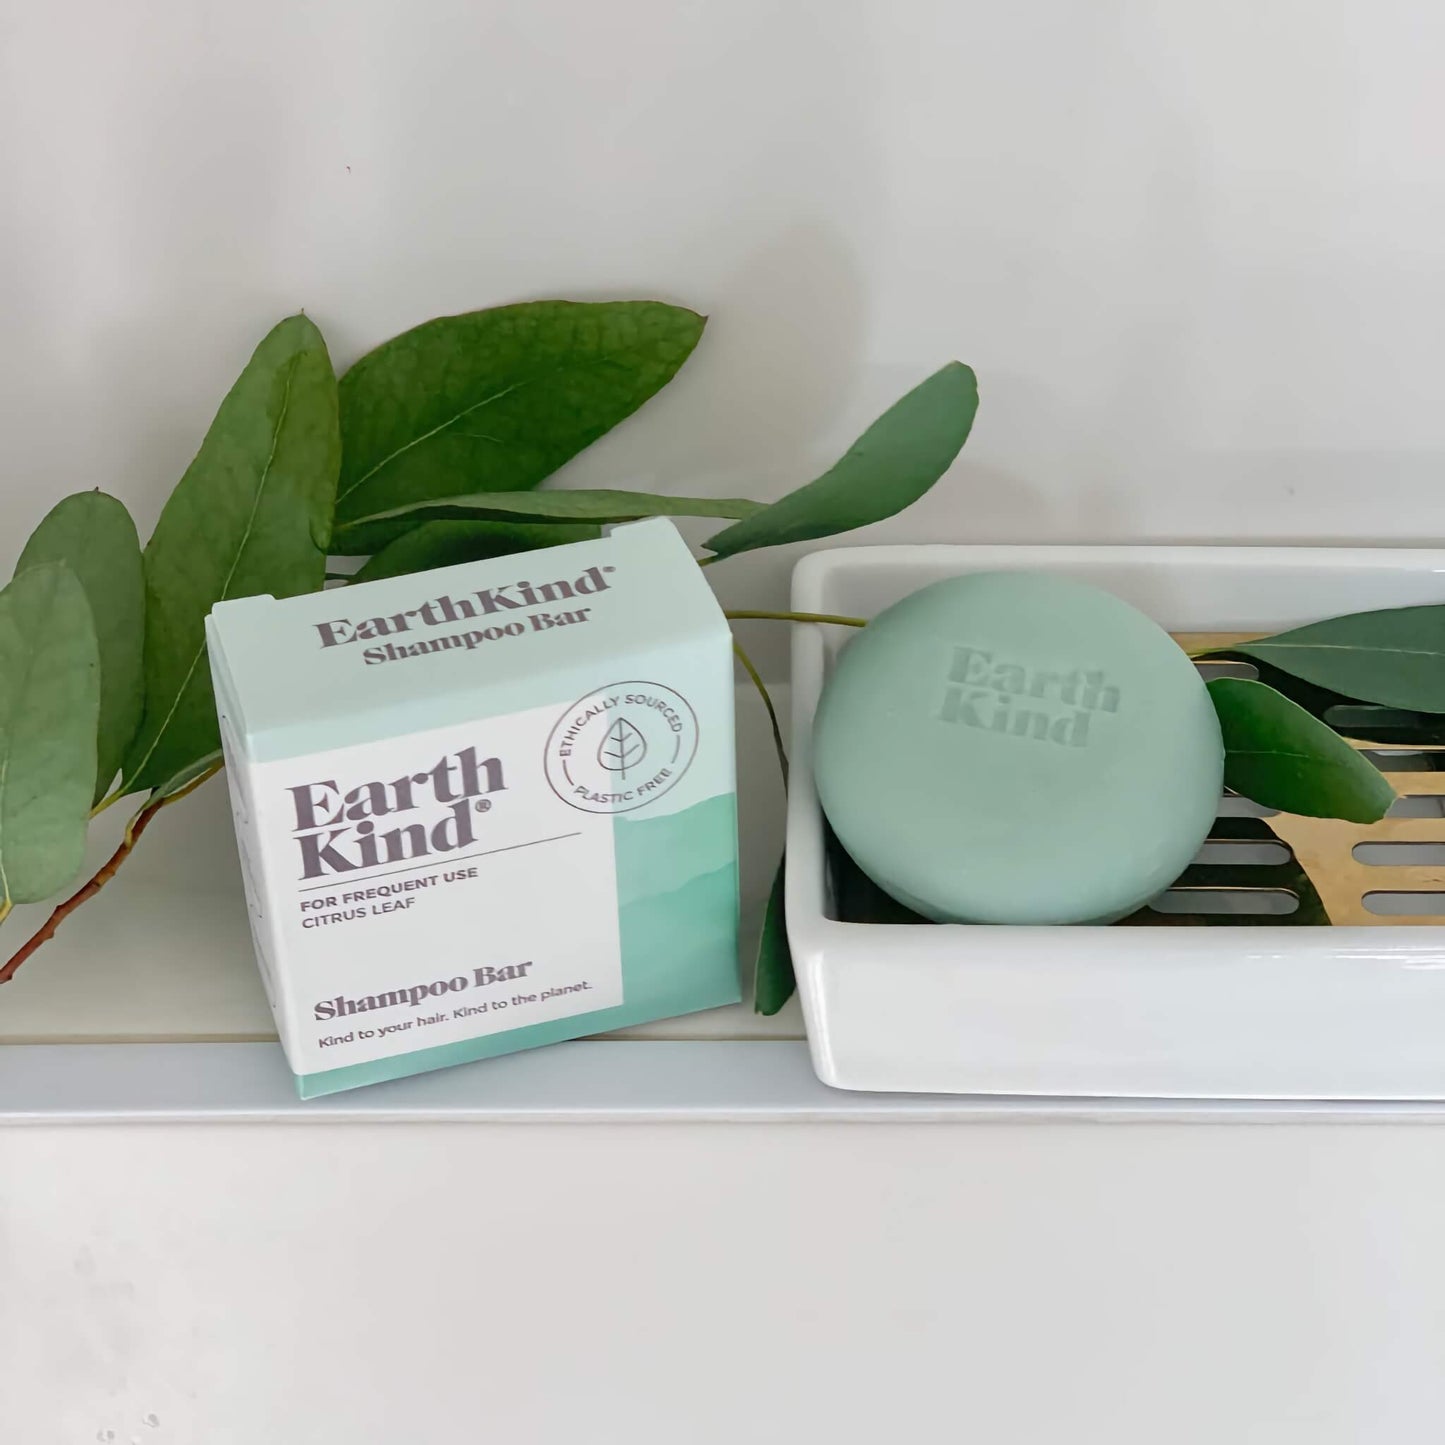 Earth Kind Citrus Leaf Shampoo Bar for Frequent Use & Oily Hair